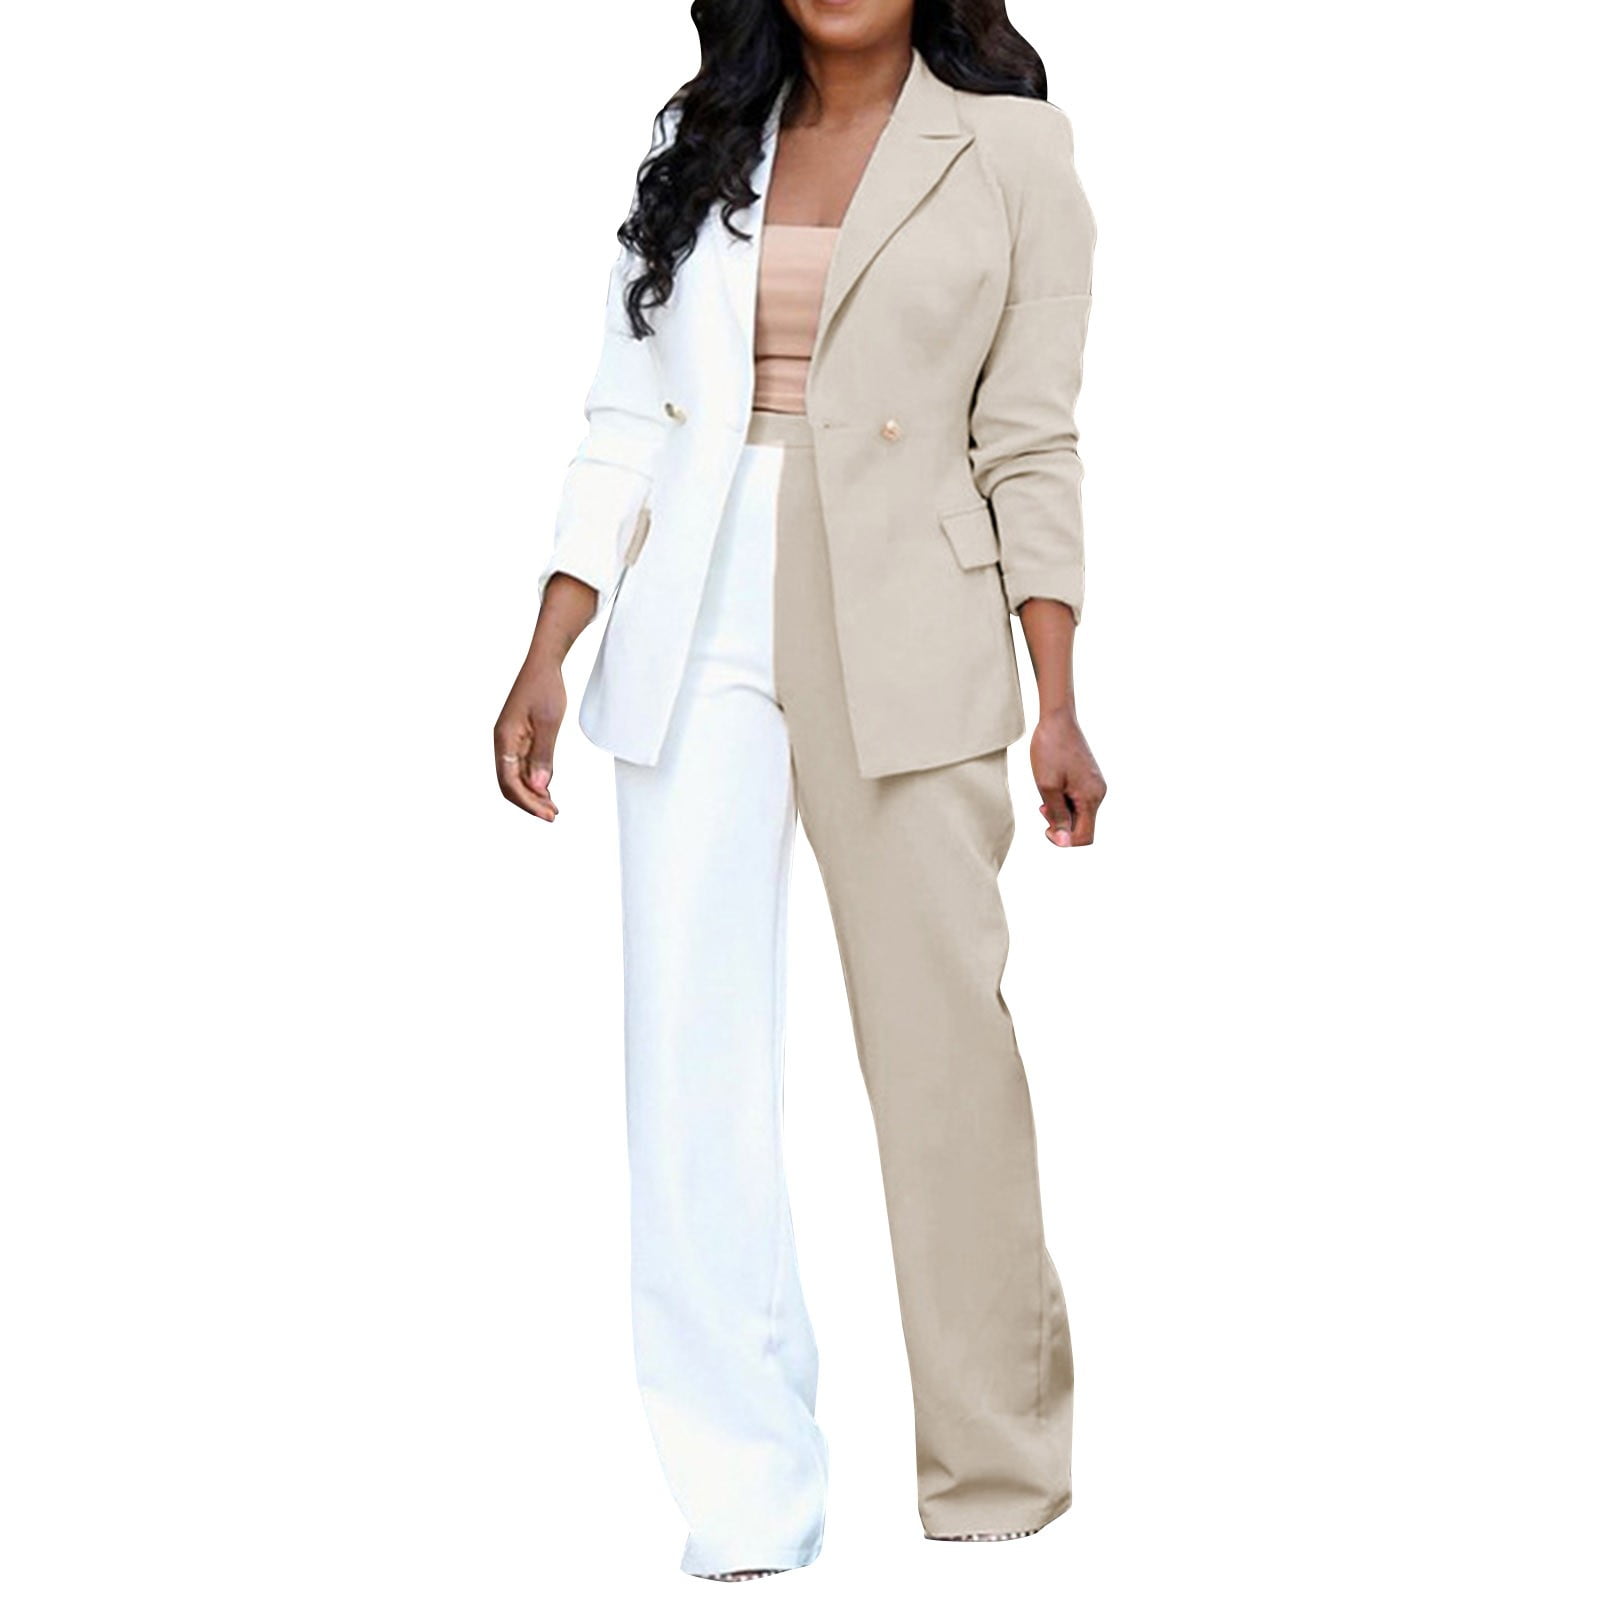 NKOOGH Wedding Pant Suits for Bride Two Piece for Women Pants Suit Women  Fashion Casual Clothes Long Sleeve Assorted Colors Blazer High Waist Suit